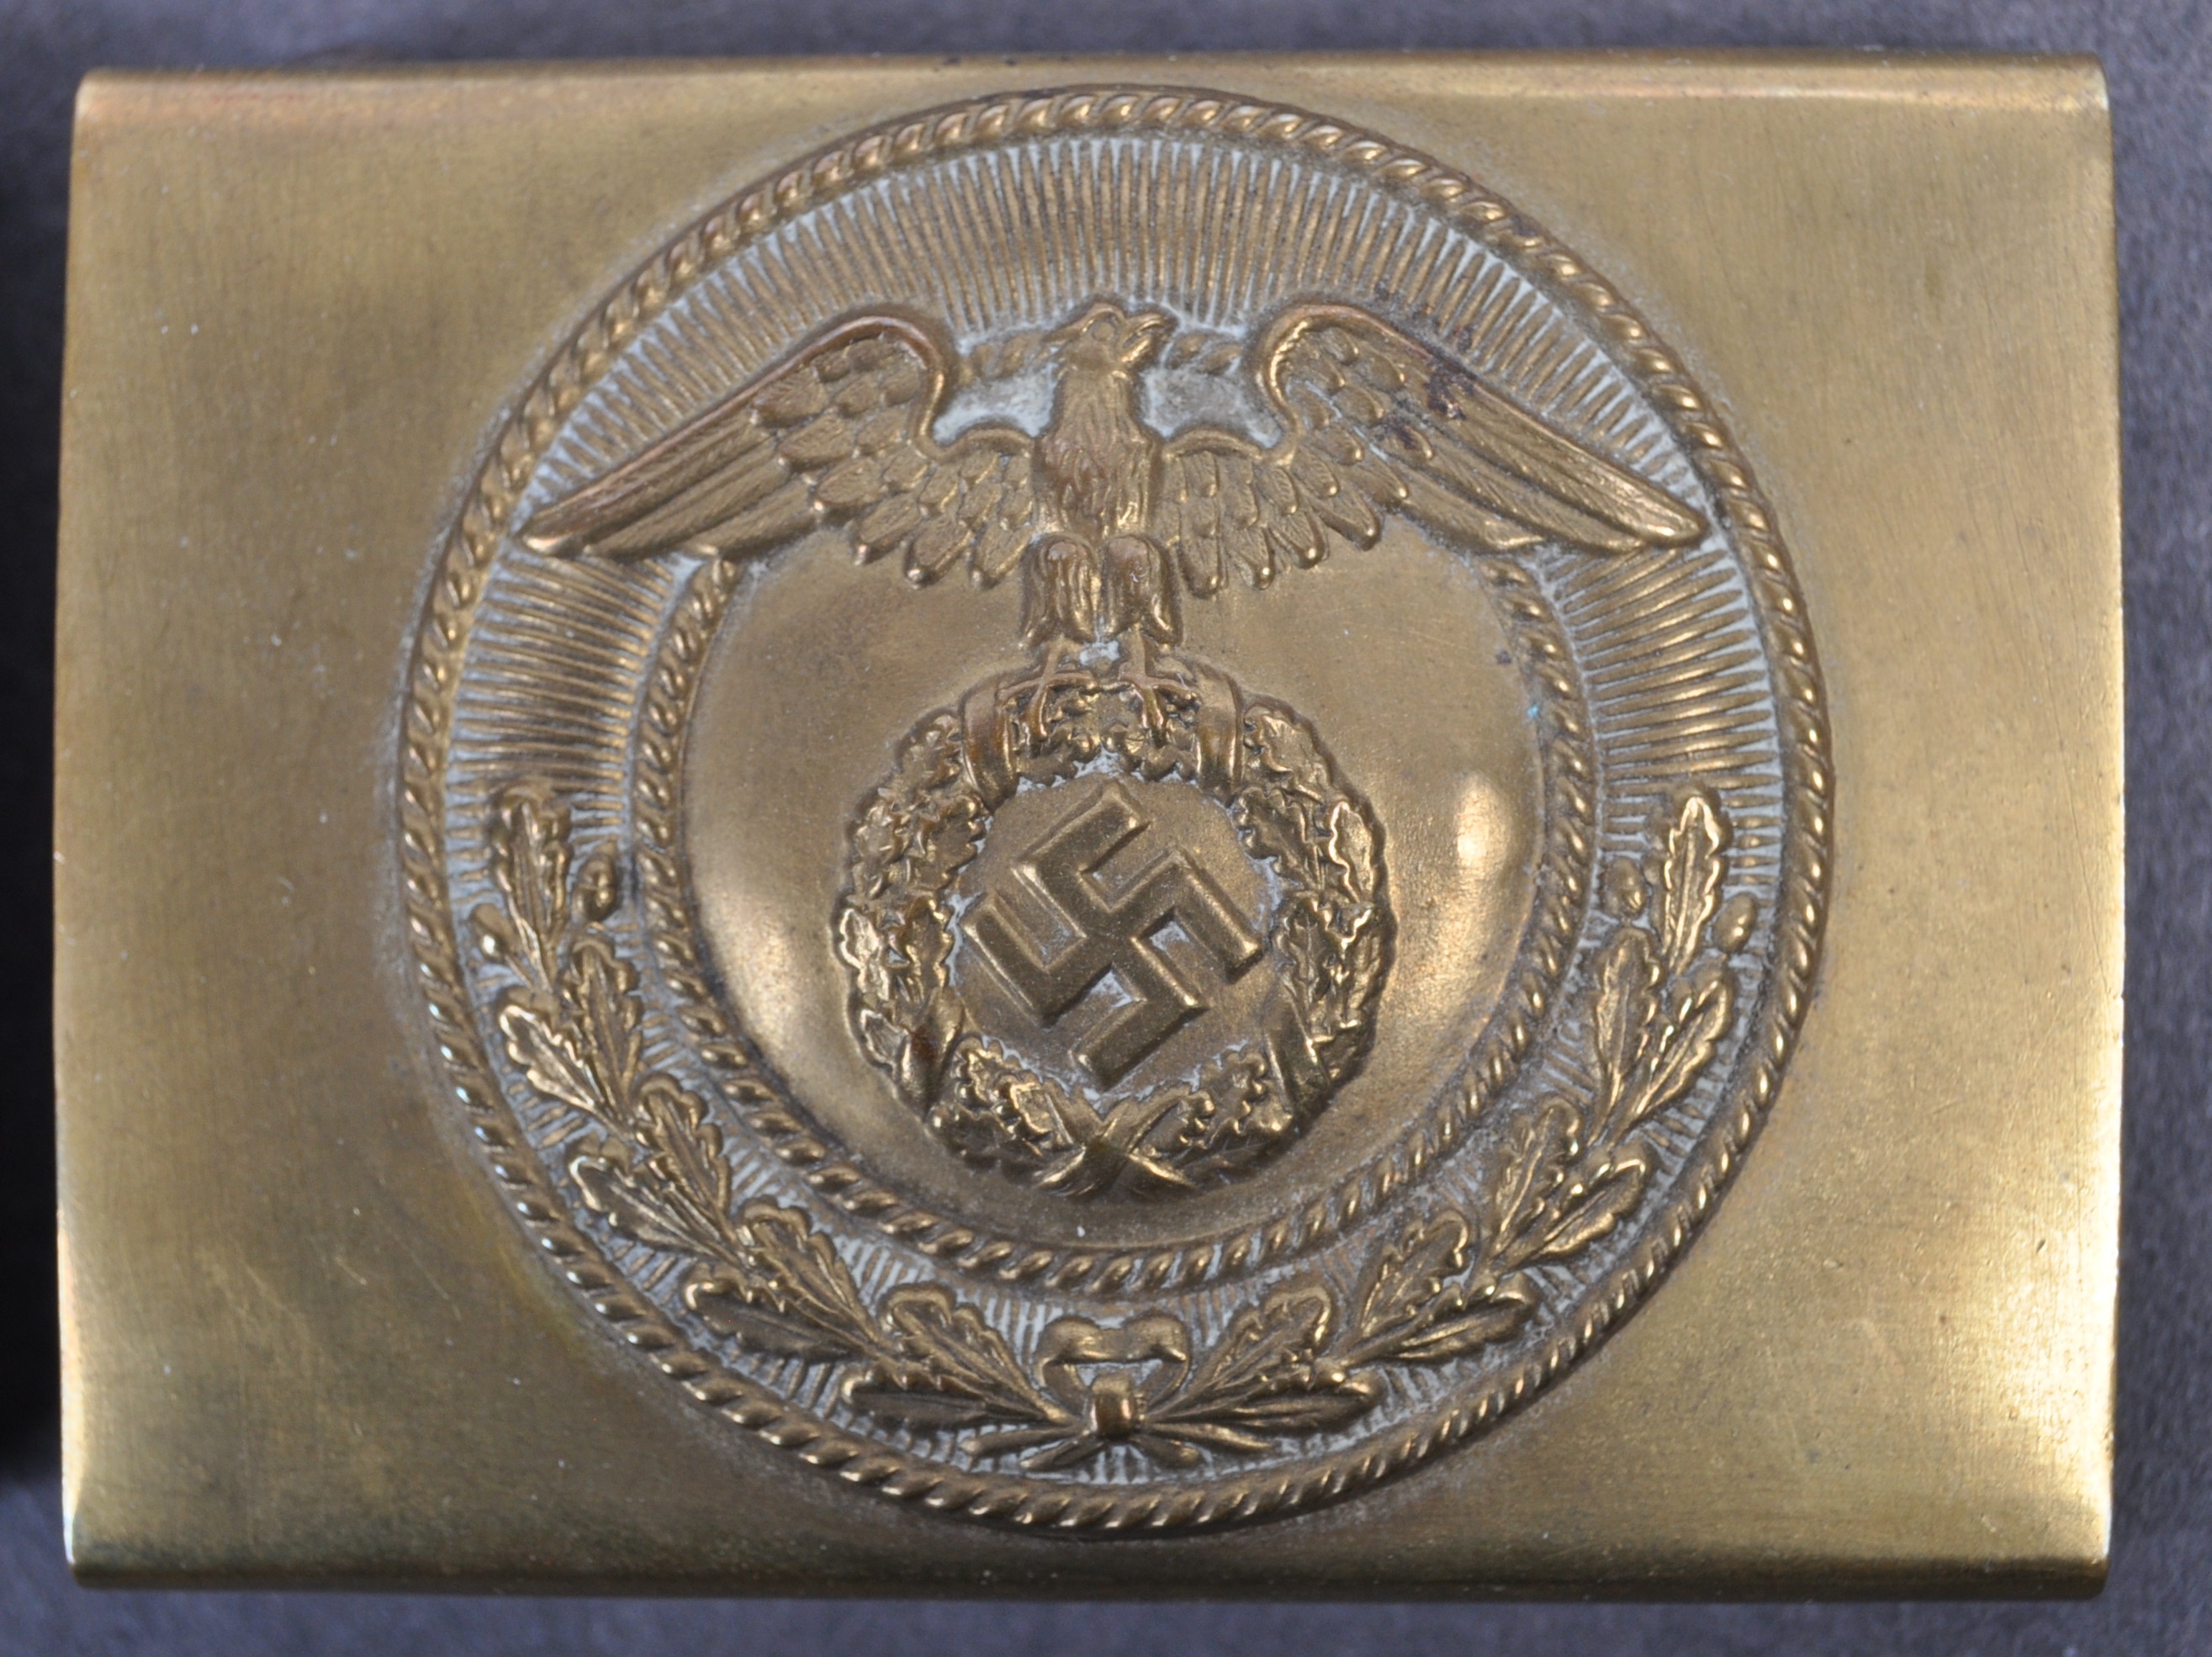 TWO GERMAN WWII THIRD REICH SA UNIFORM BELT BUCKLES - Image 3 of 6